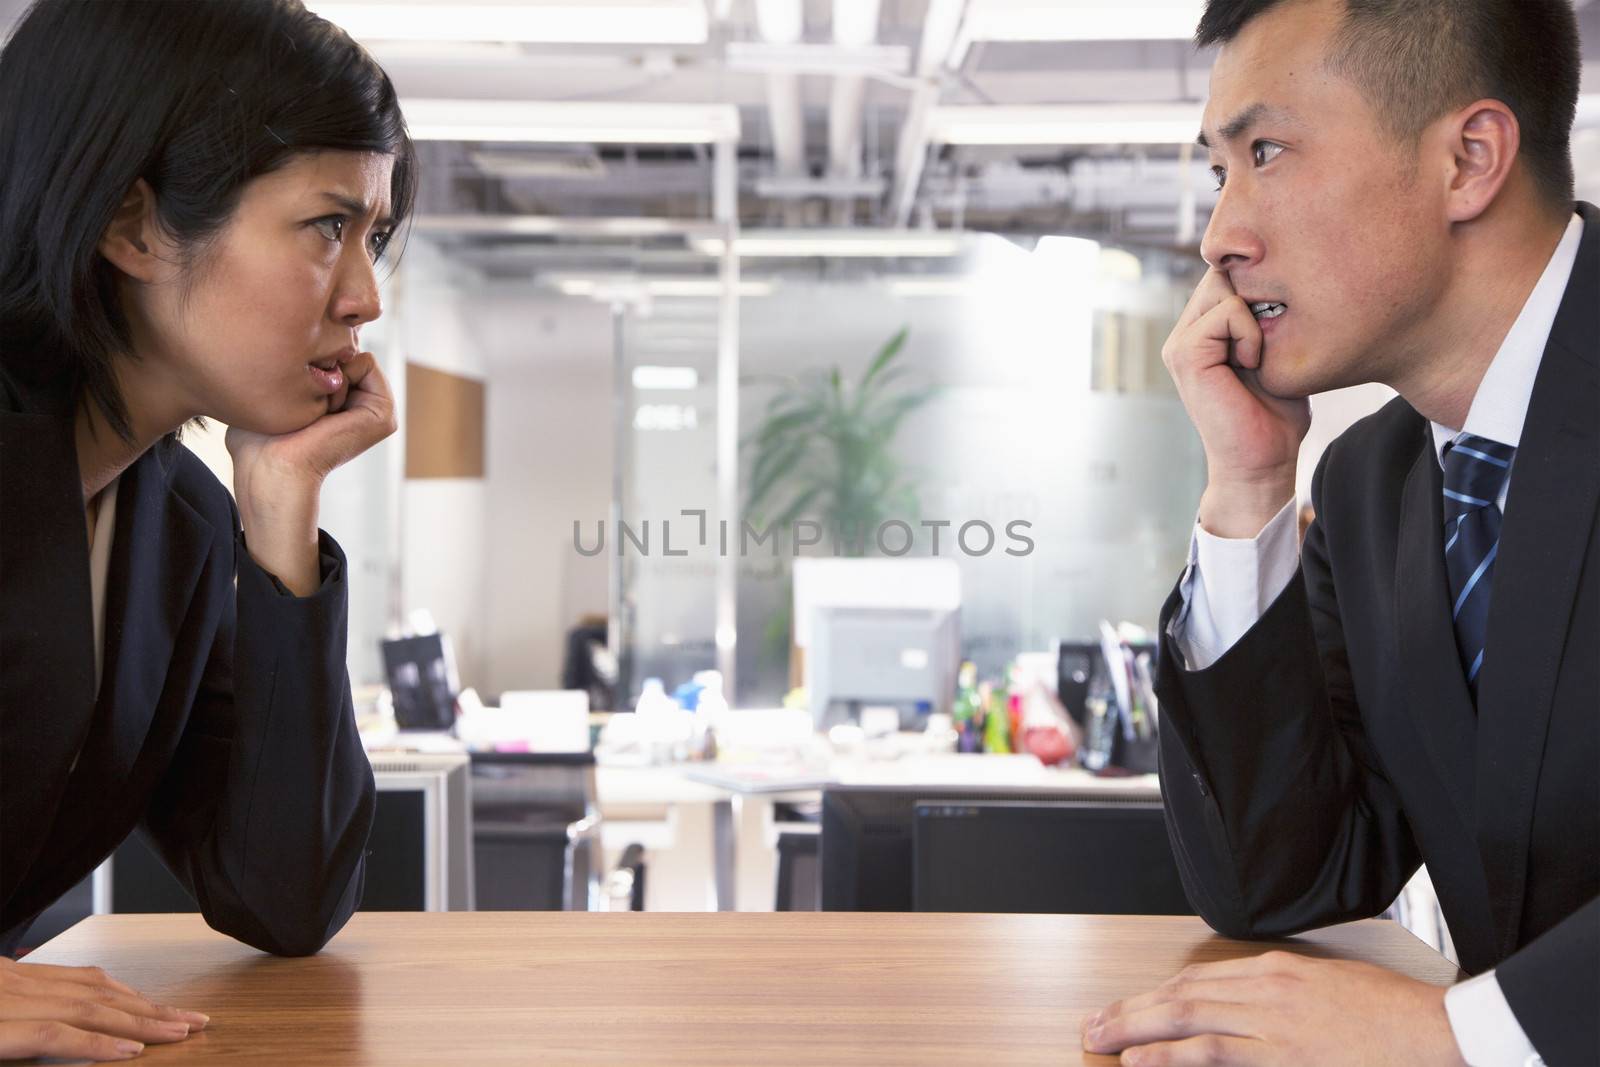 Two Business people staring at each other across a table